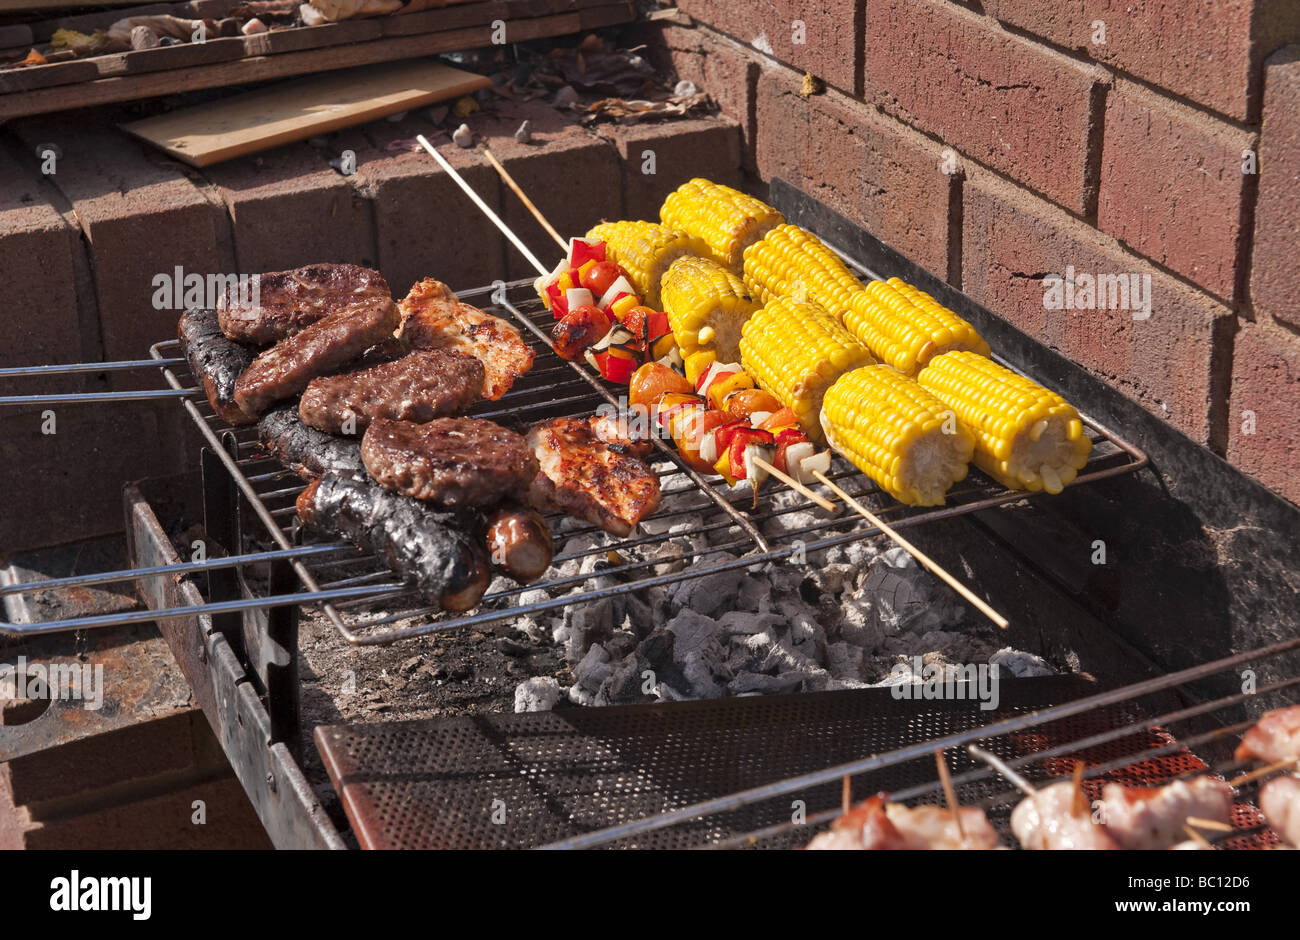 Close-up of sausages, burgers and corn and kebabs being cooked outside in the open air on a barbeque (bbq) in summer Stock Photo